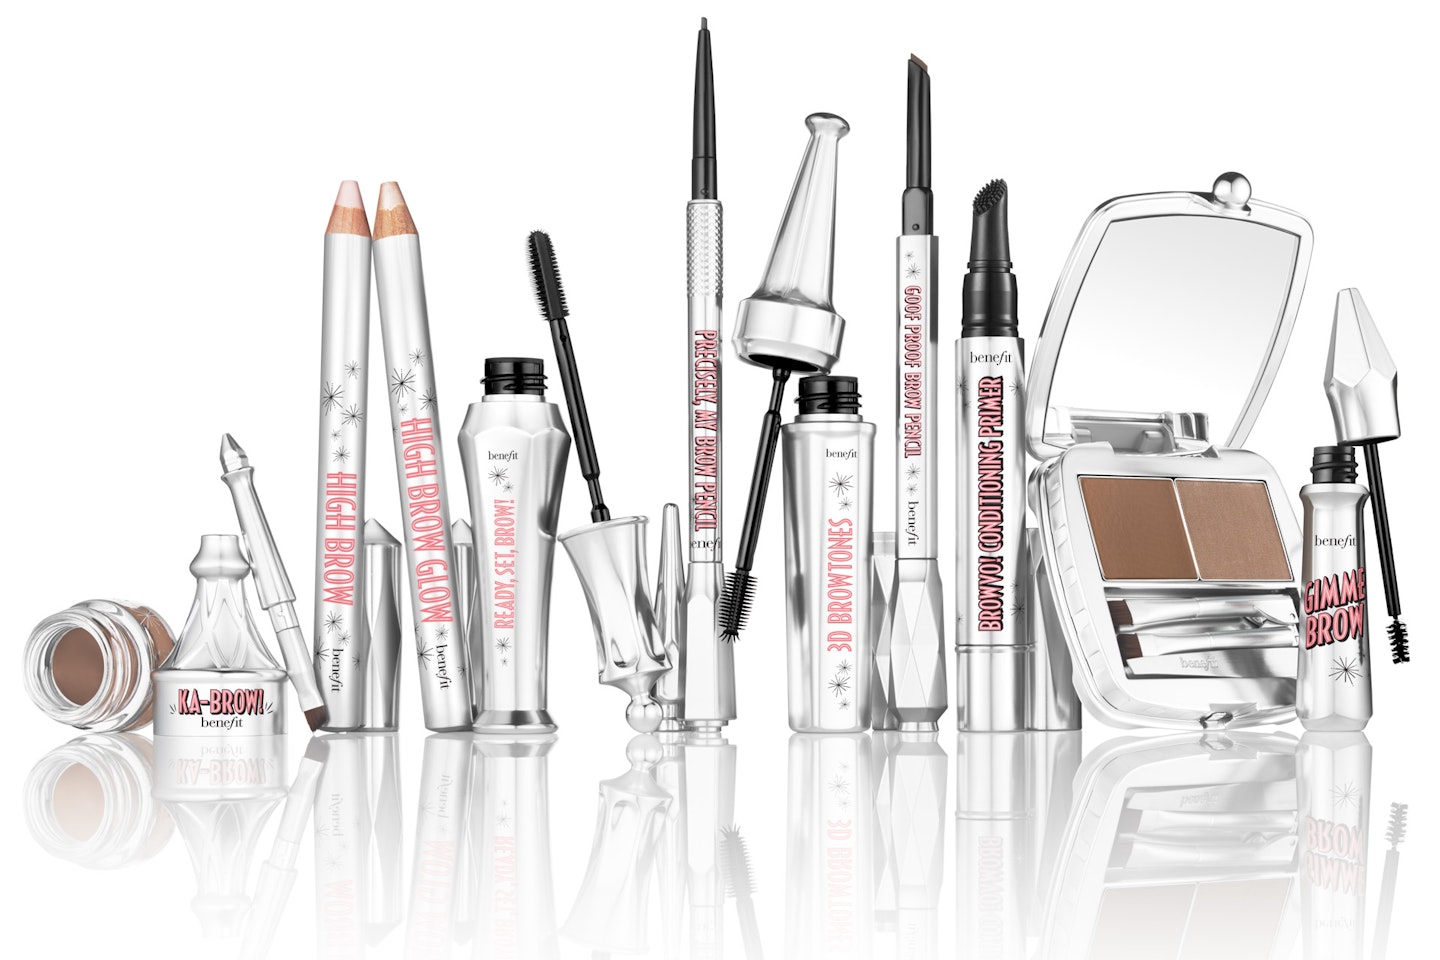 Benefit Brow Products 2016